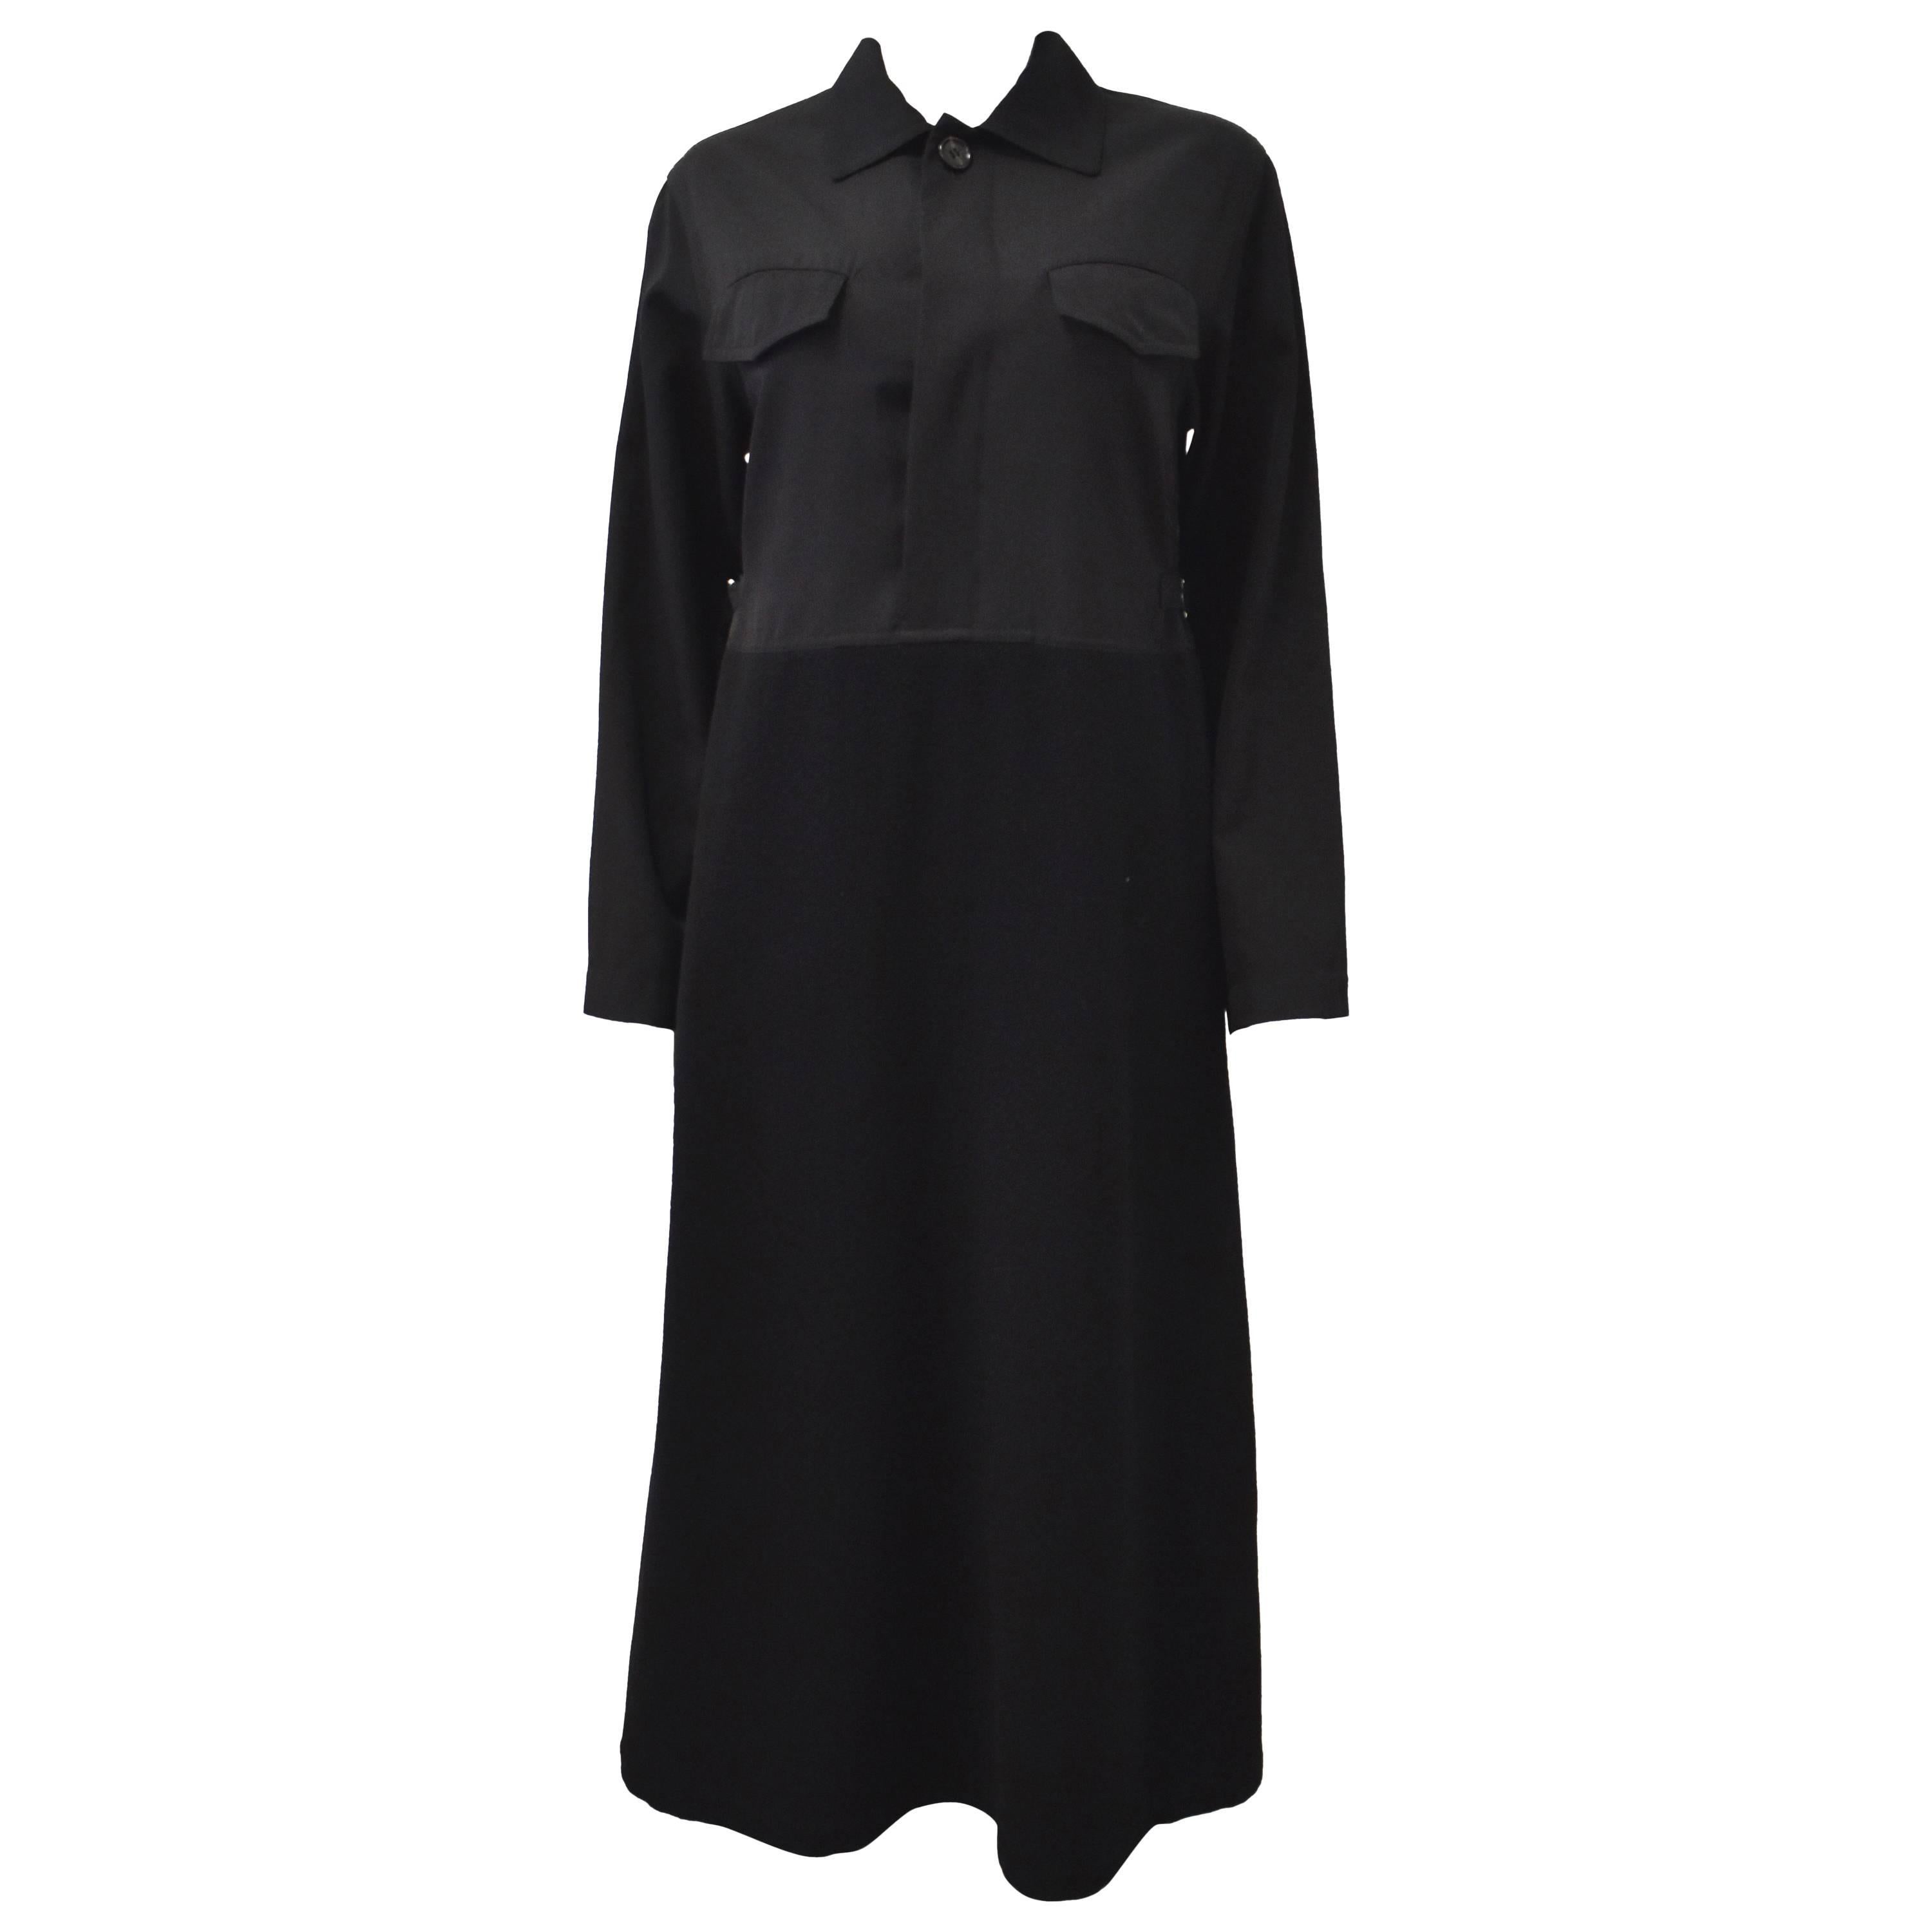 Comme des Garcons Black Tricot Dress with Long Sleeves and Chest Pockets 1994